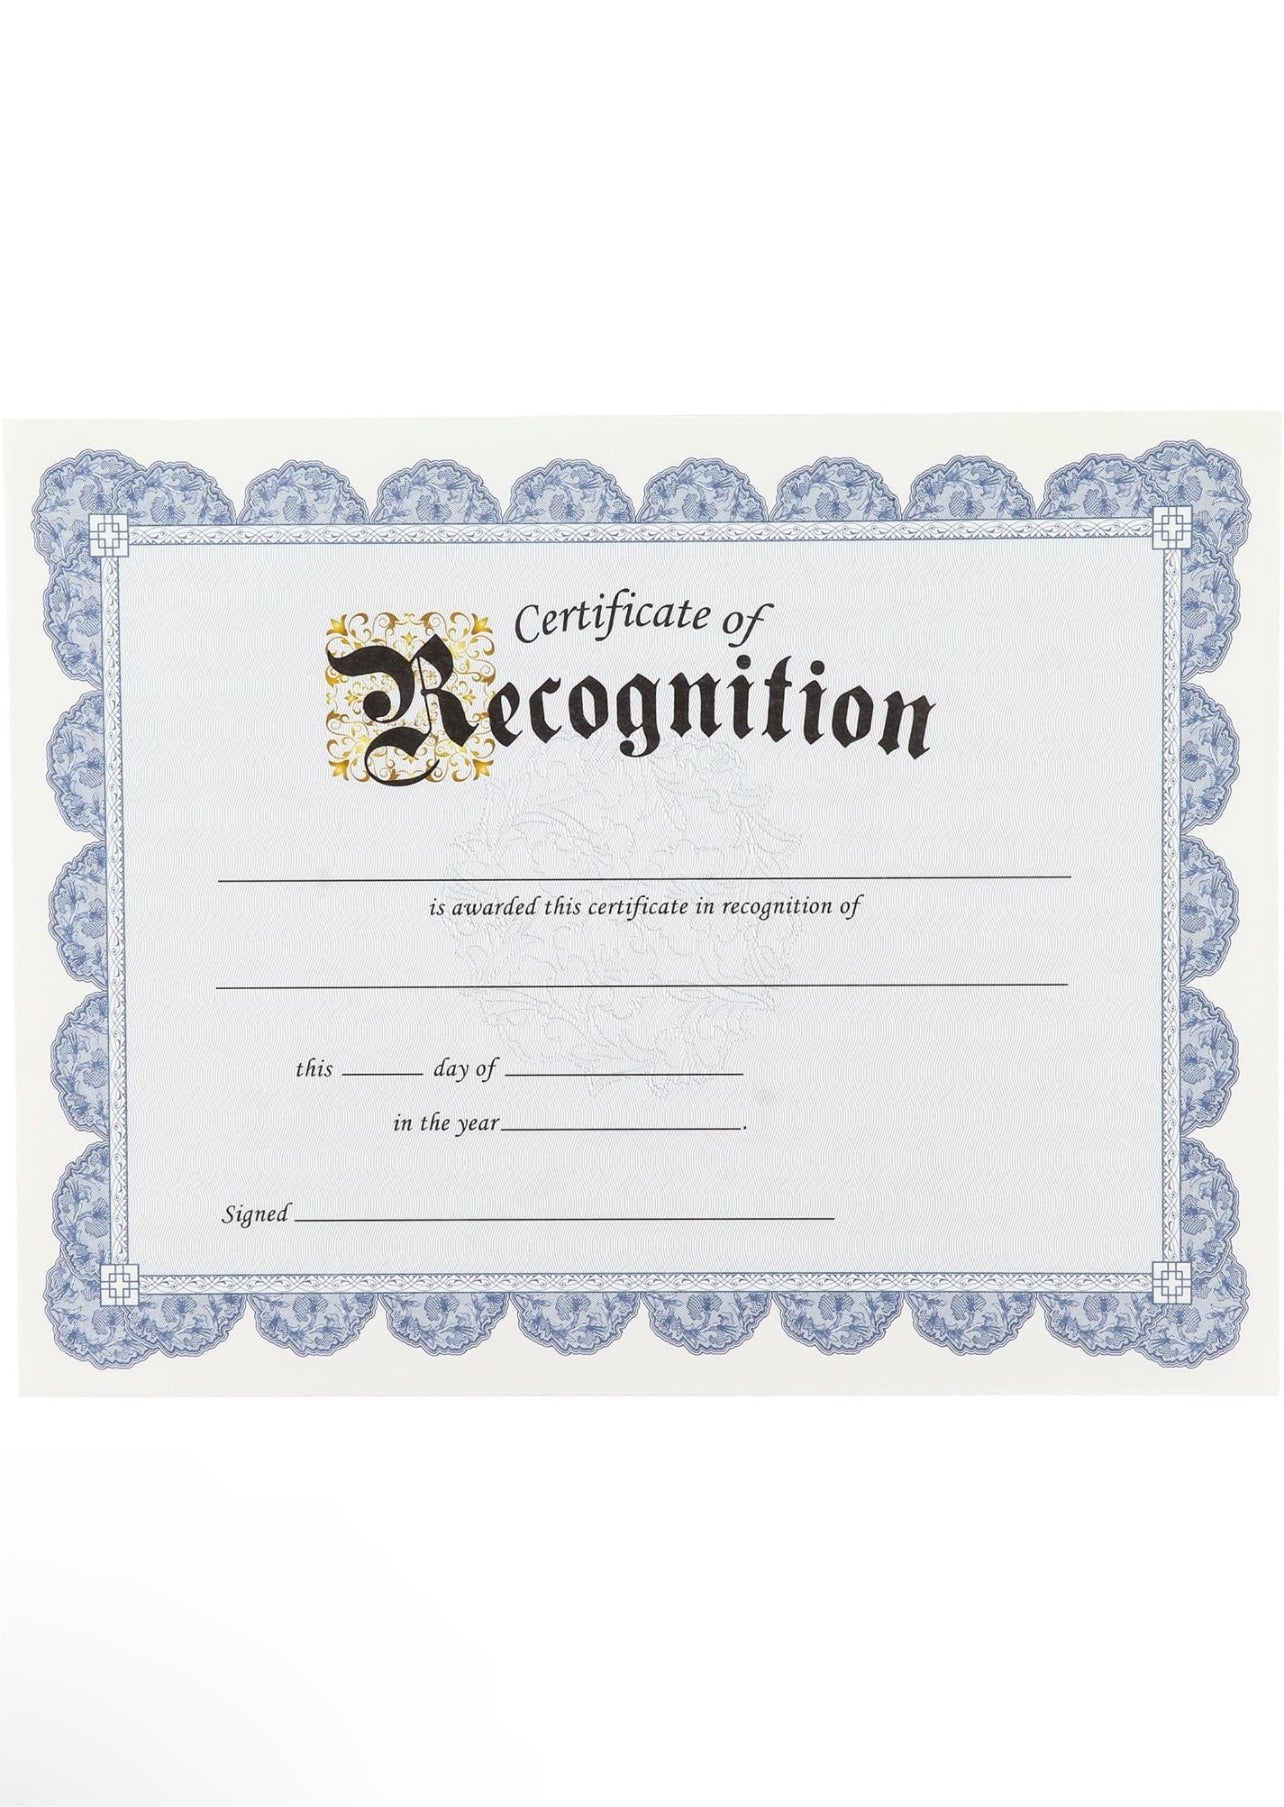 48 Sheets Blue Floral Certificate of Completion Paper for Printing with  Gold Foil Sticker Seals - Customizable with Border for Graduation, Diploma,  Awards, Recognition Documents (8.5 x 11 in)